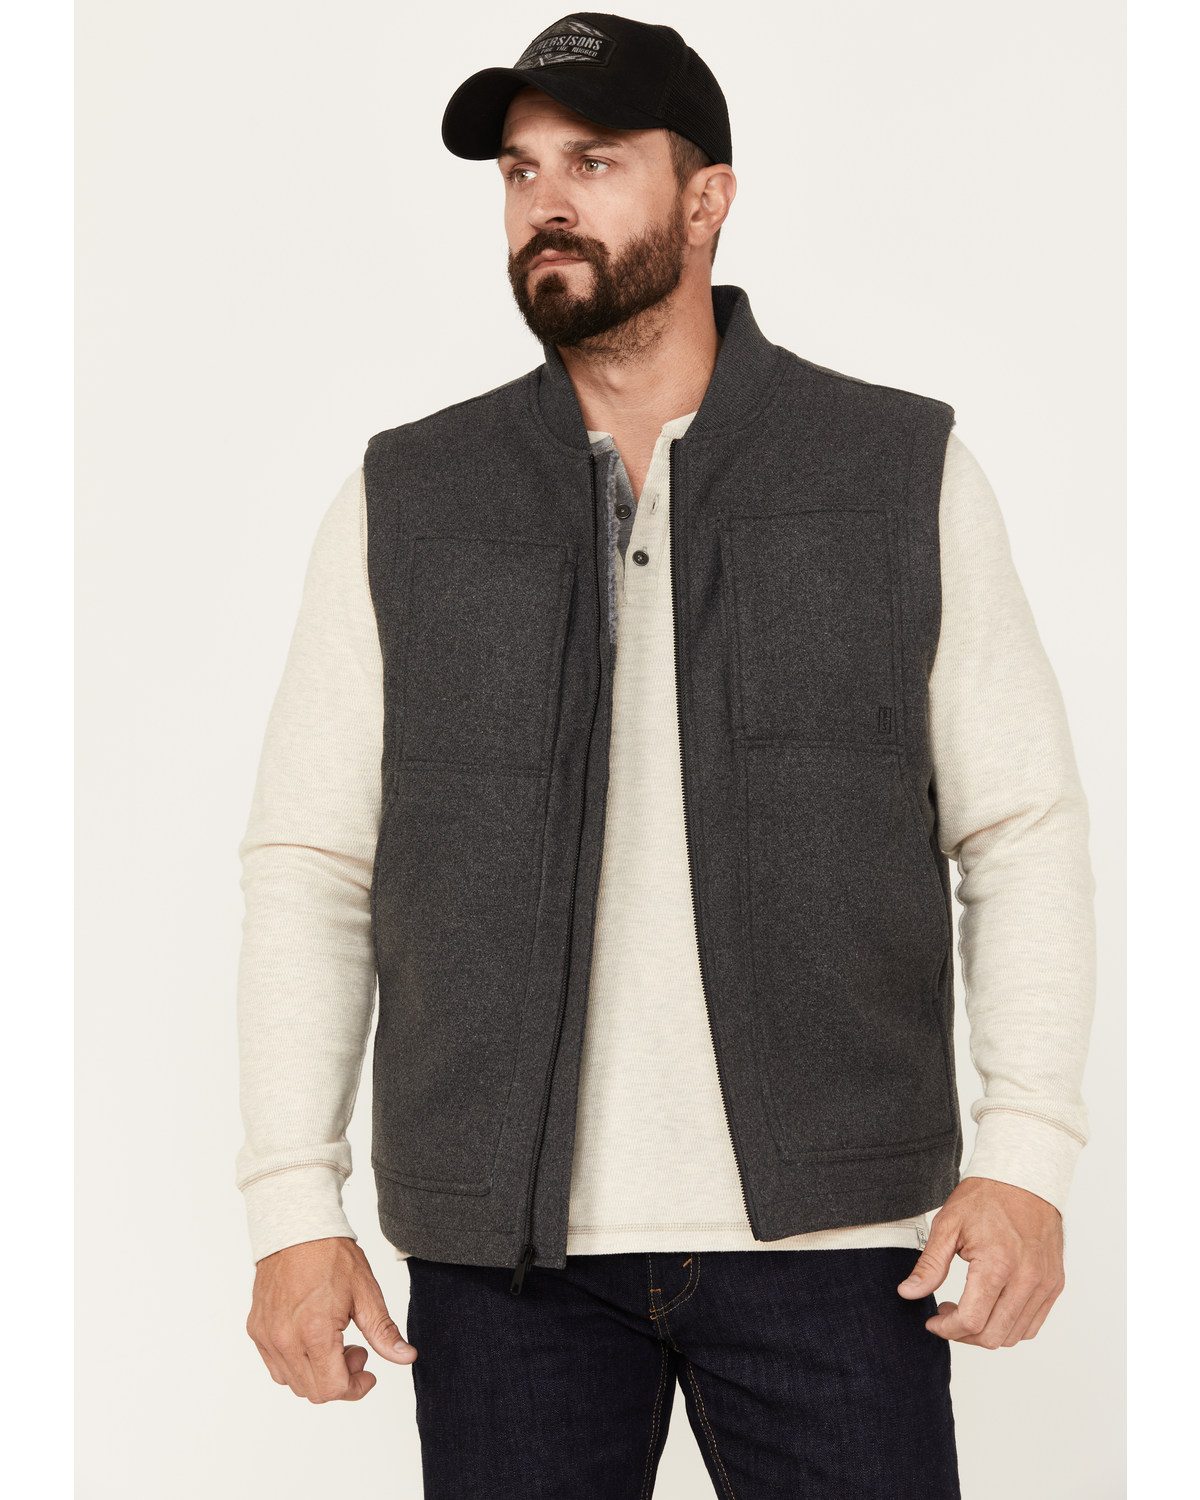 Brothers and Sons Men's Buffalo Check Wool Zip Vest